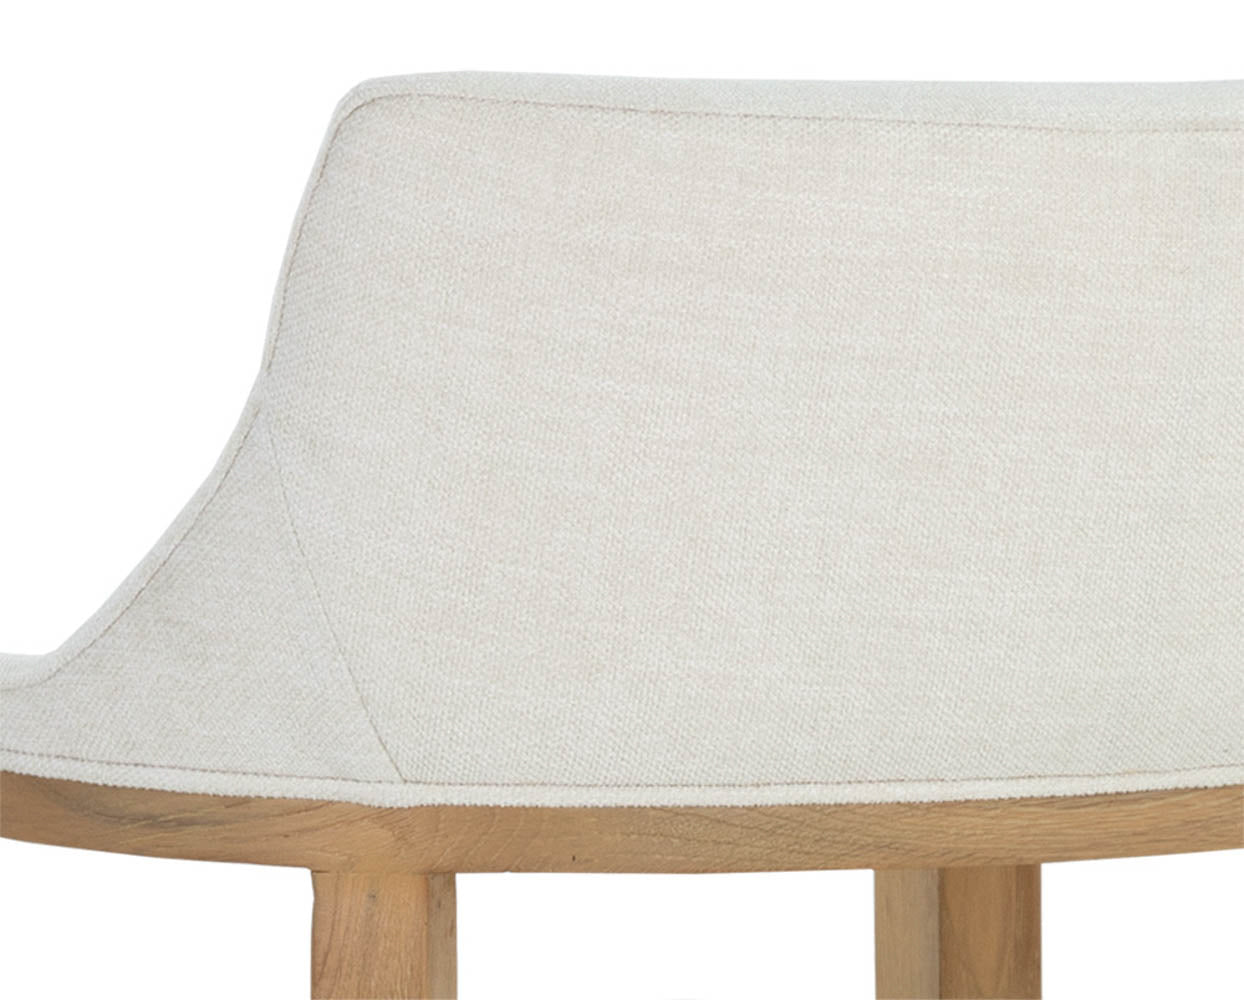 Brylea Dining Armchair - Natural